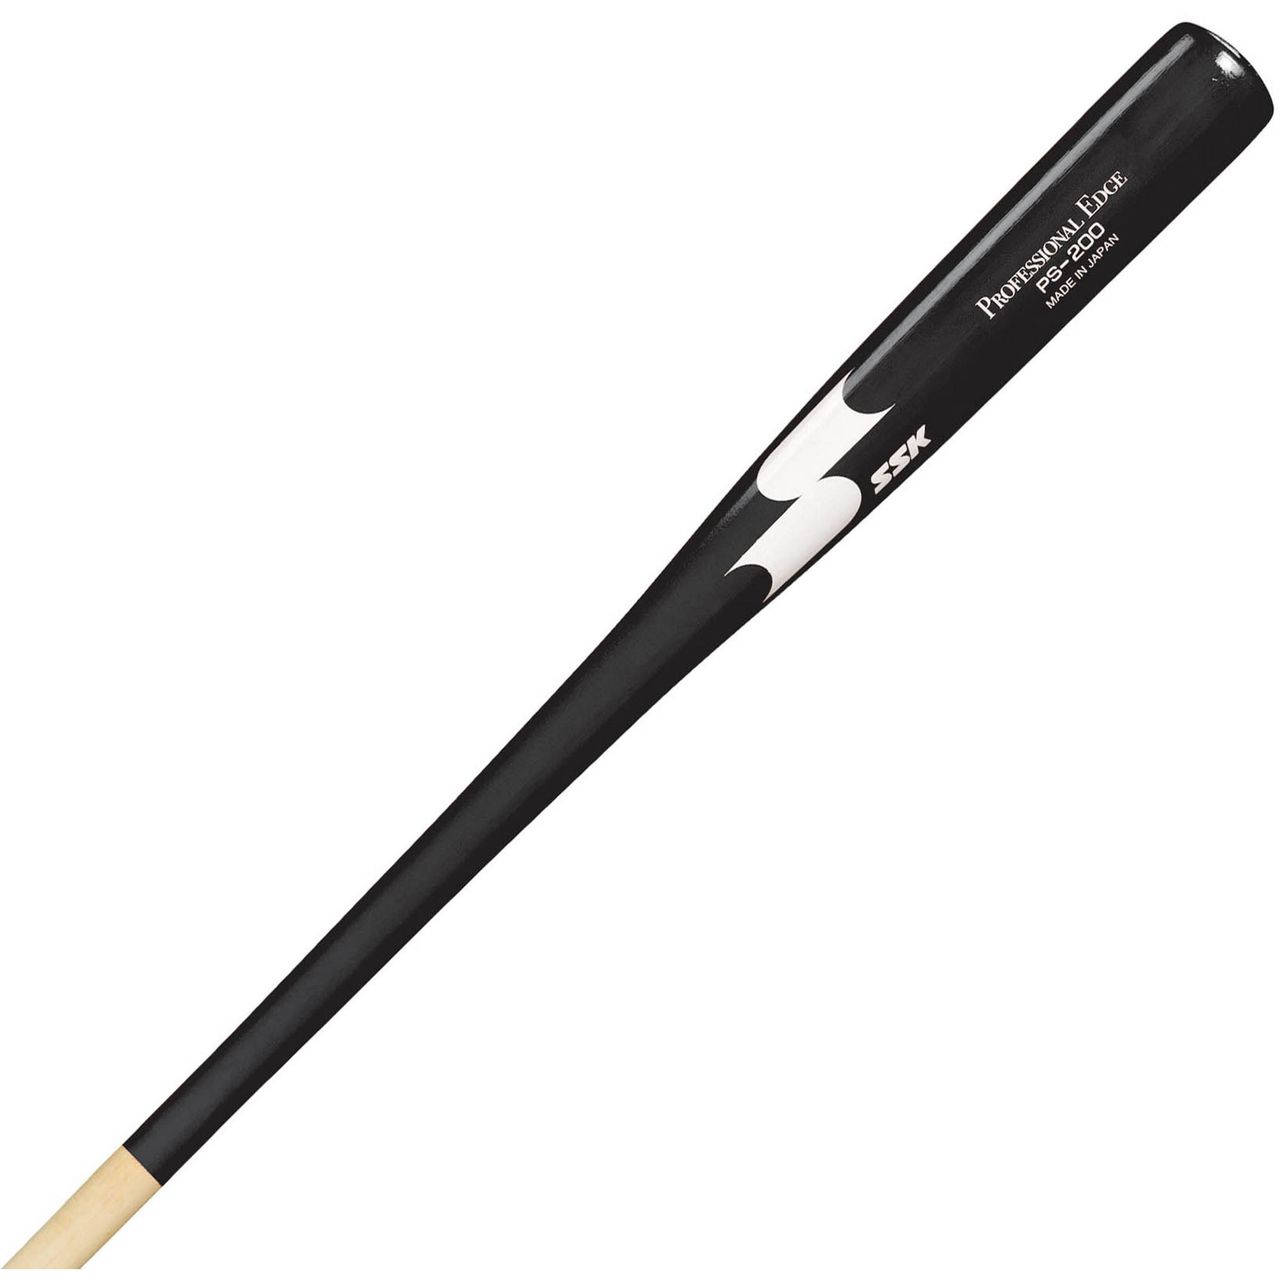 ssk-fungo-bat-ps-200-black-professional-edge-wood-fungo-37-inch PS-200BK SSK 083351448554 The most sought after wood Fungo on the Market. SSKs Wood